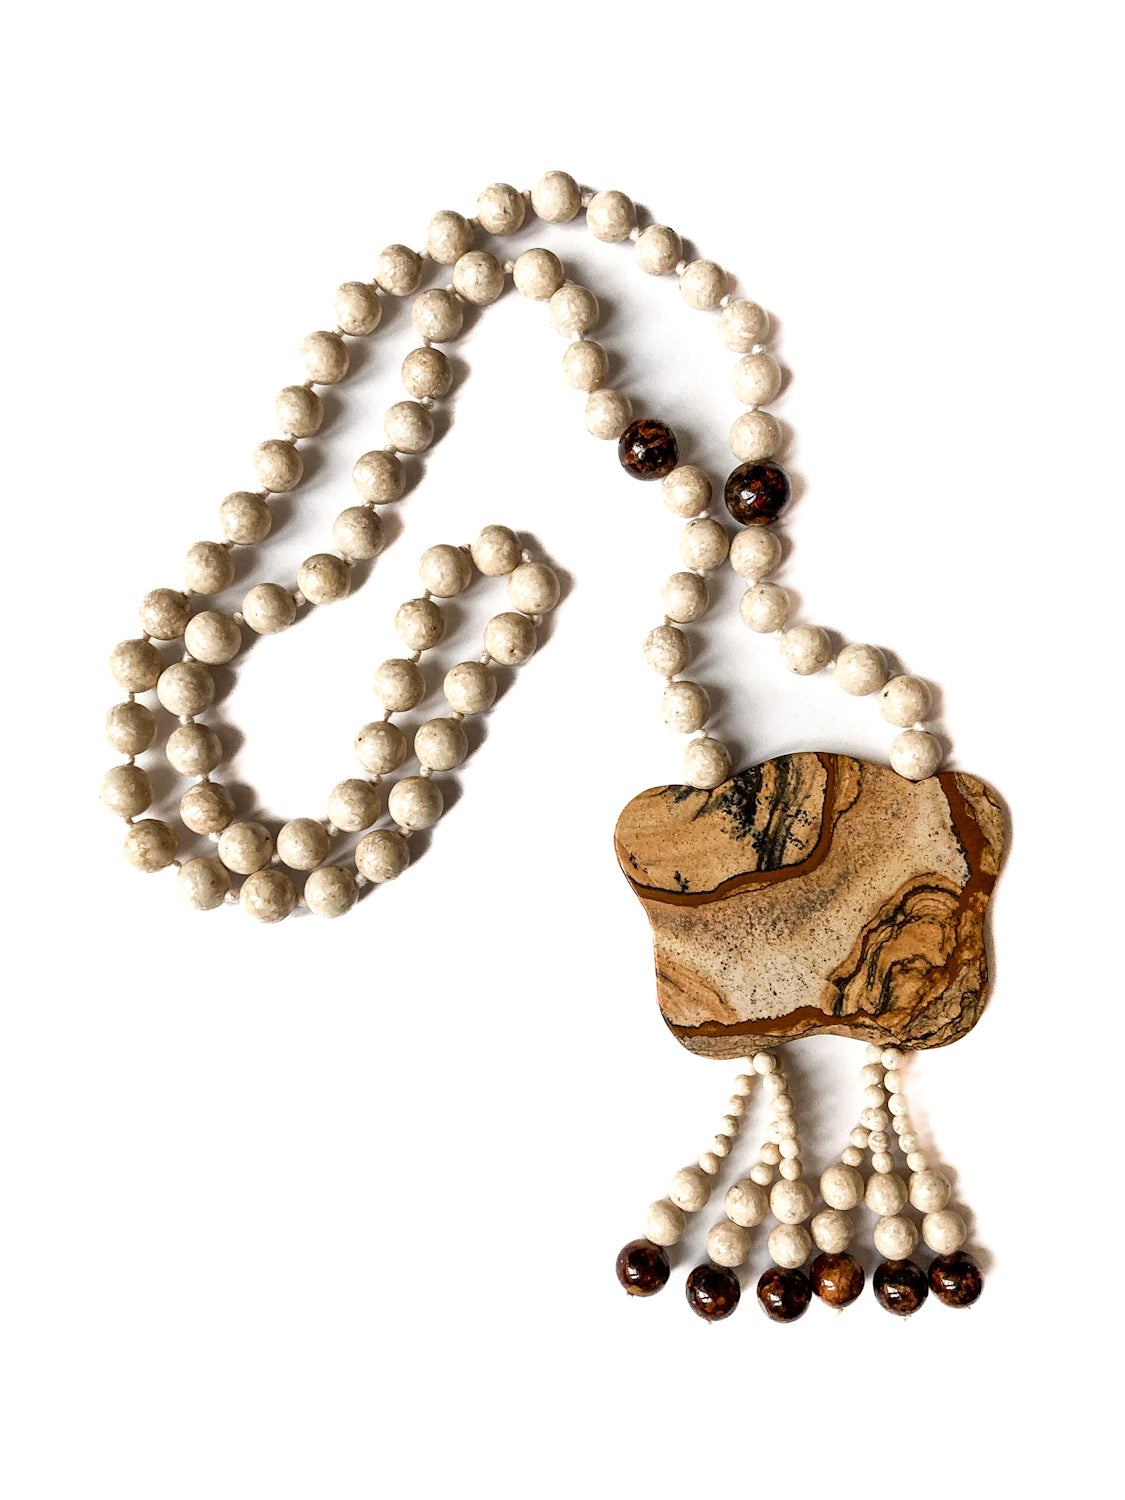 Stunning Natural Stone Pendant Hand Knotted Bead Tassel Statement Necklace